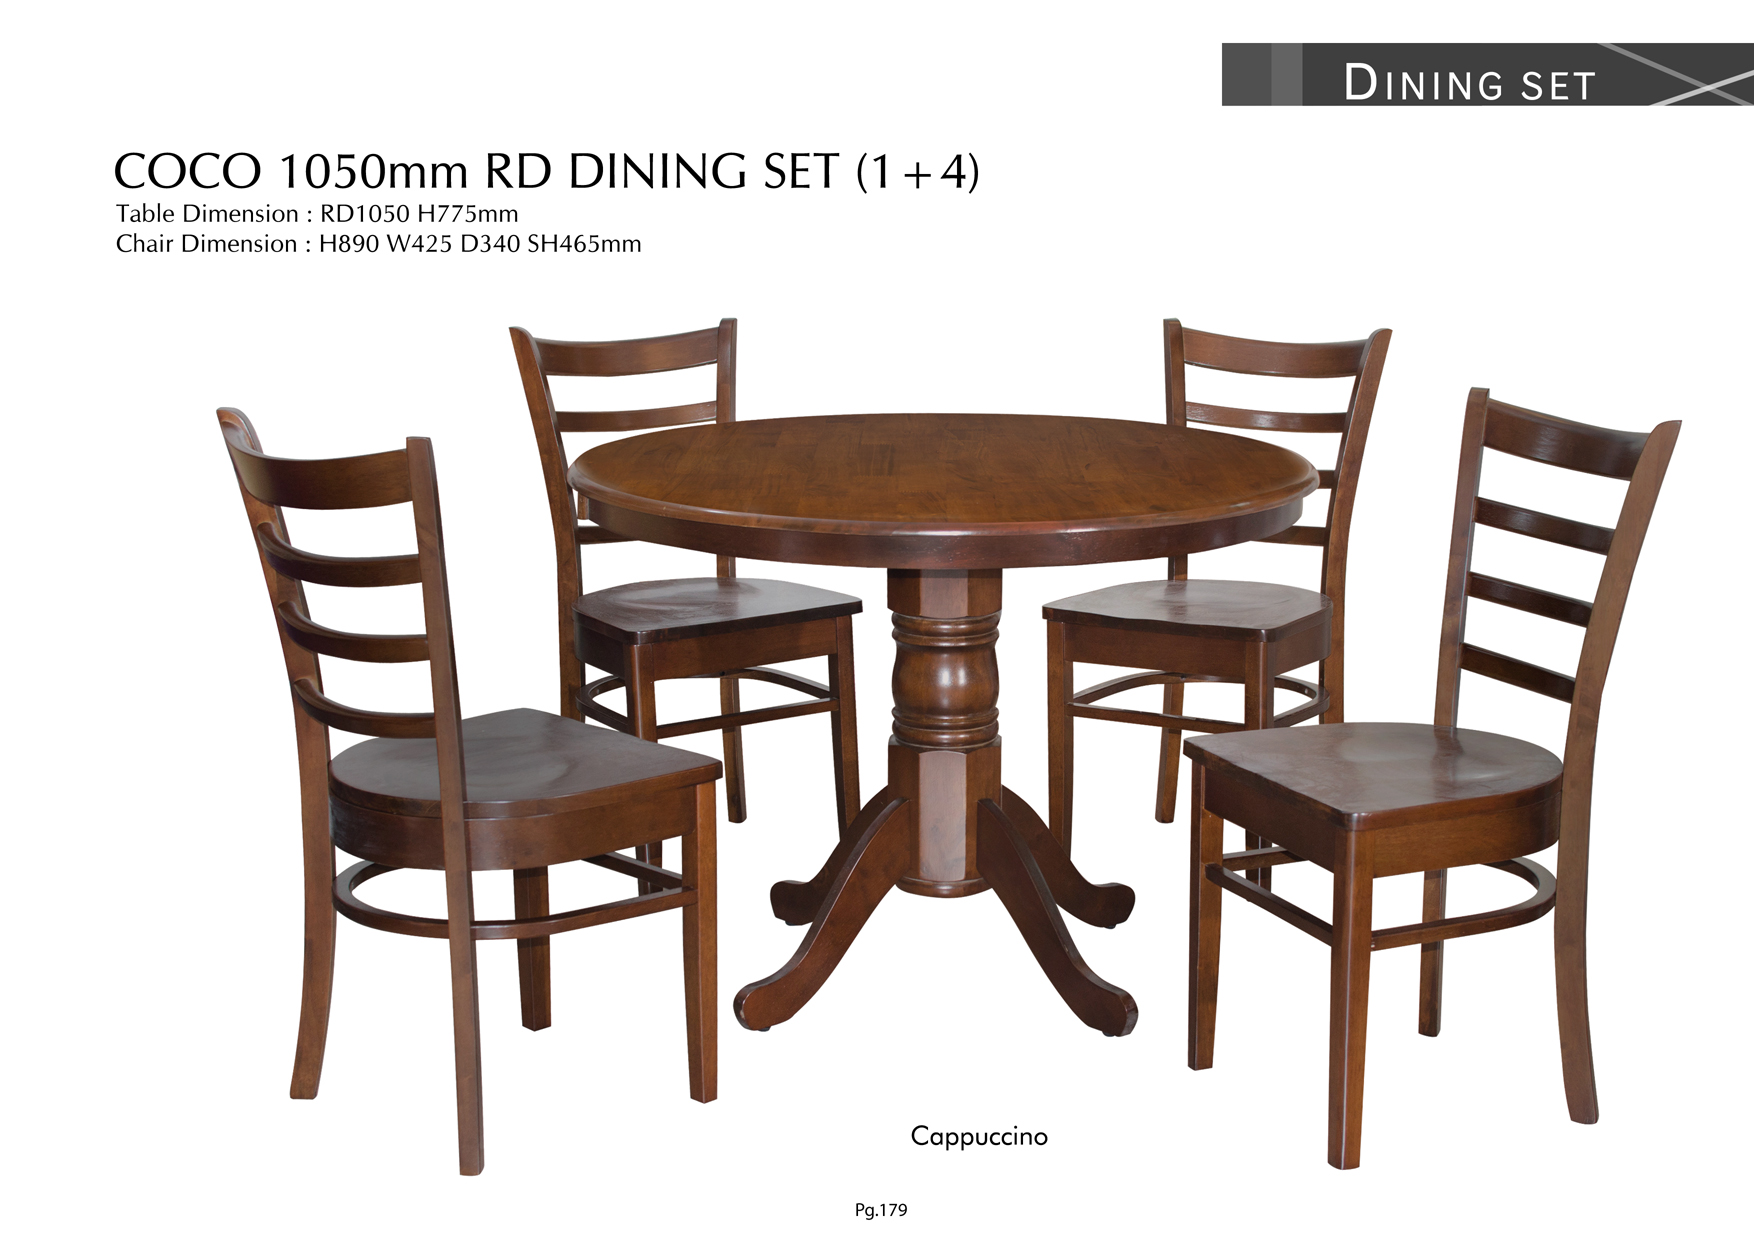 Product: PG179. COCO DINING SET